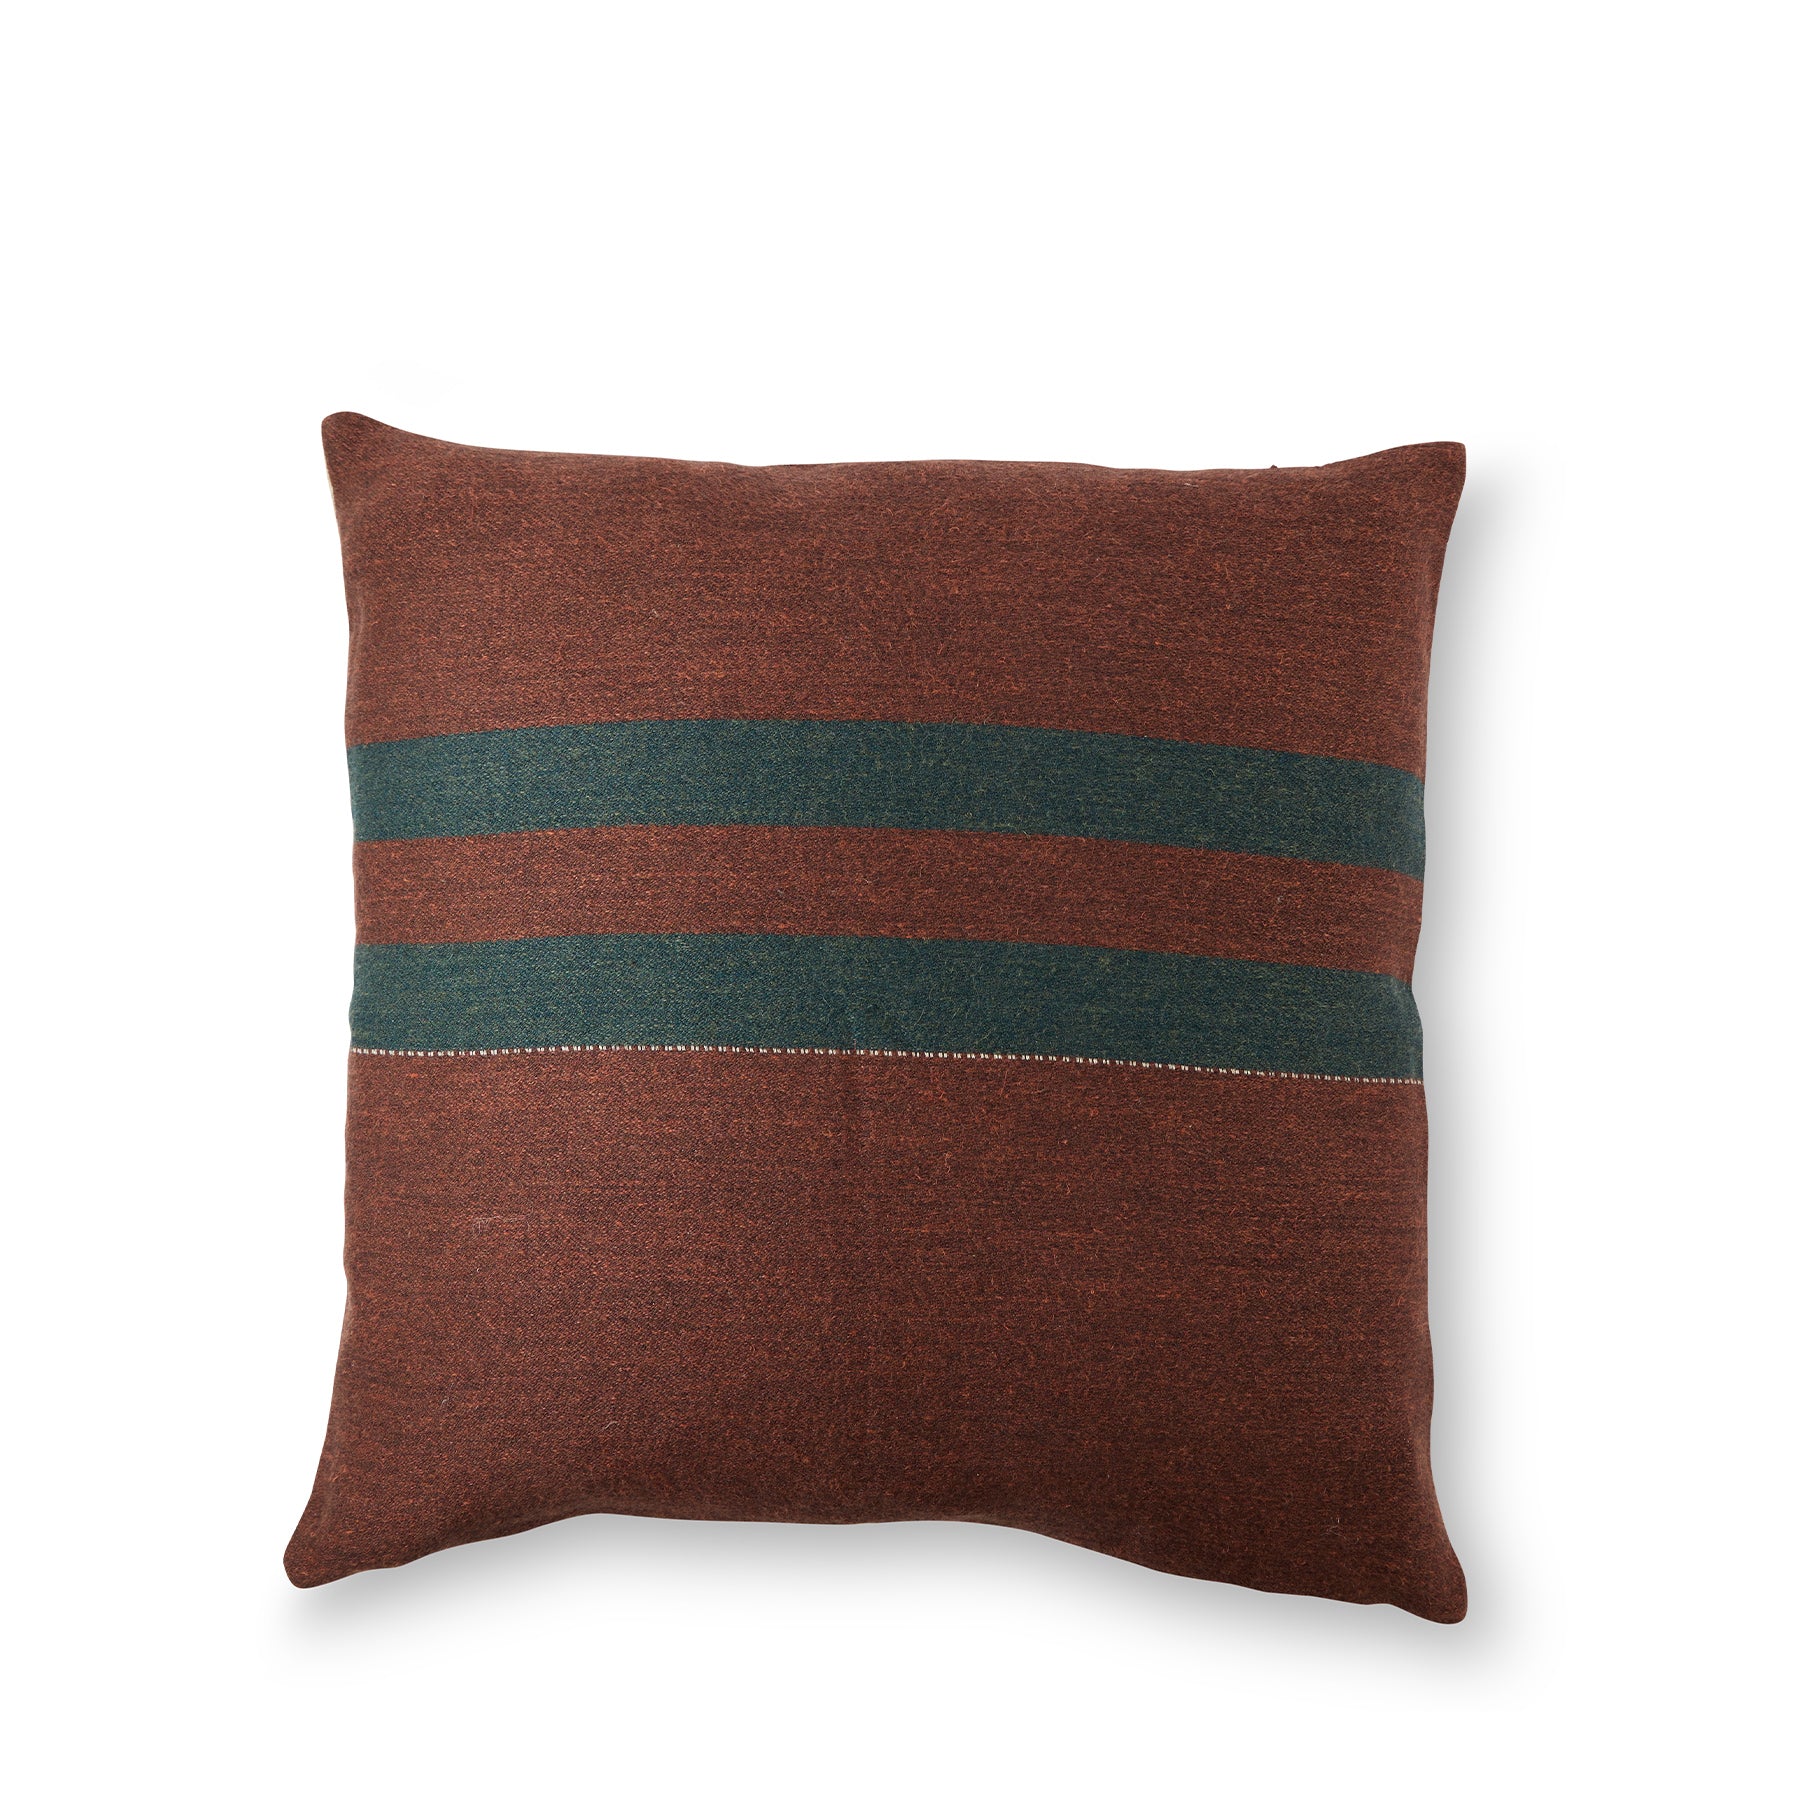 Juniper Pillow in Leather Zoom Image 1